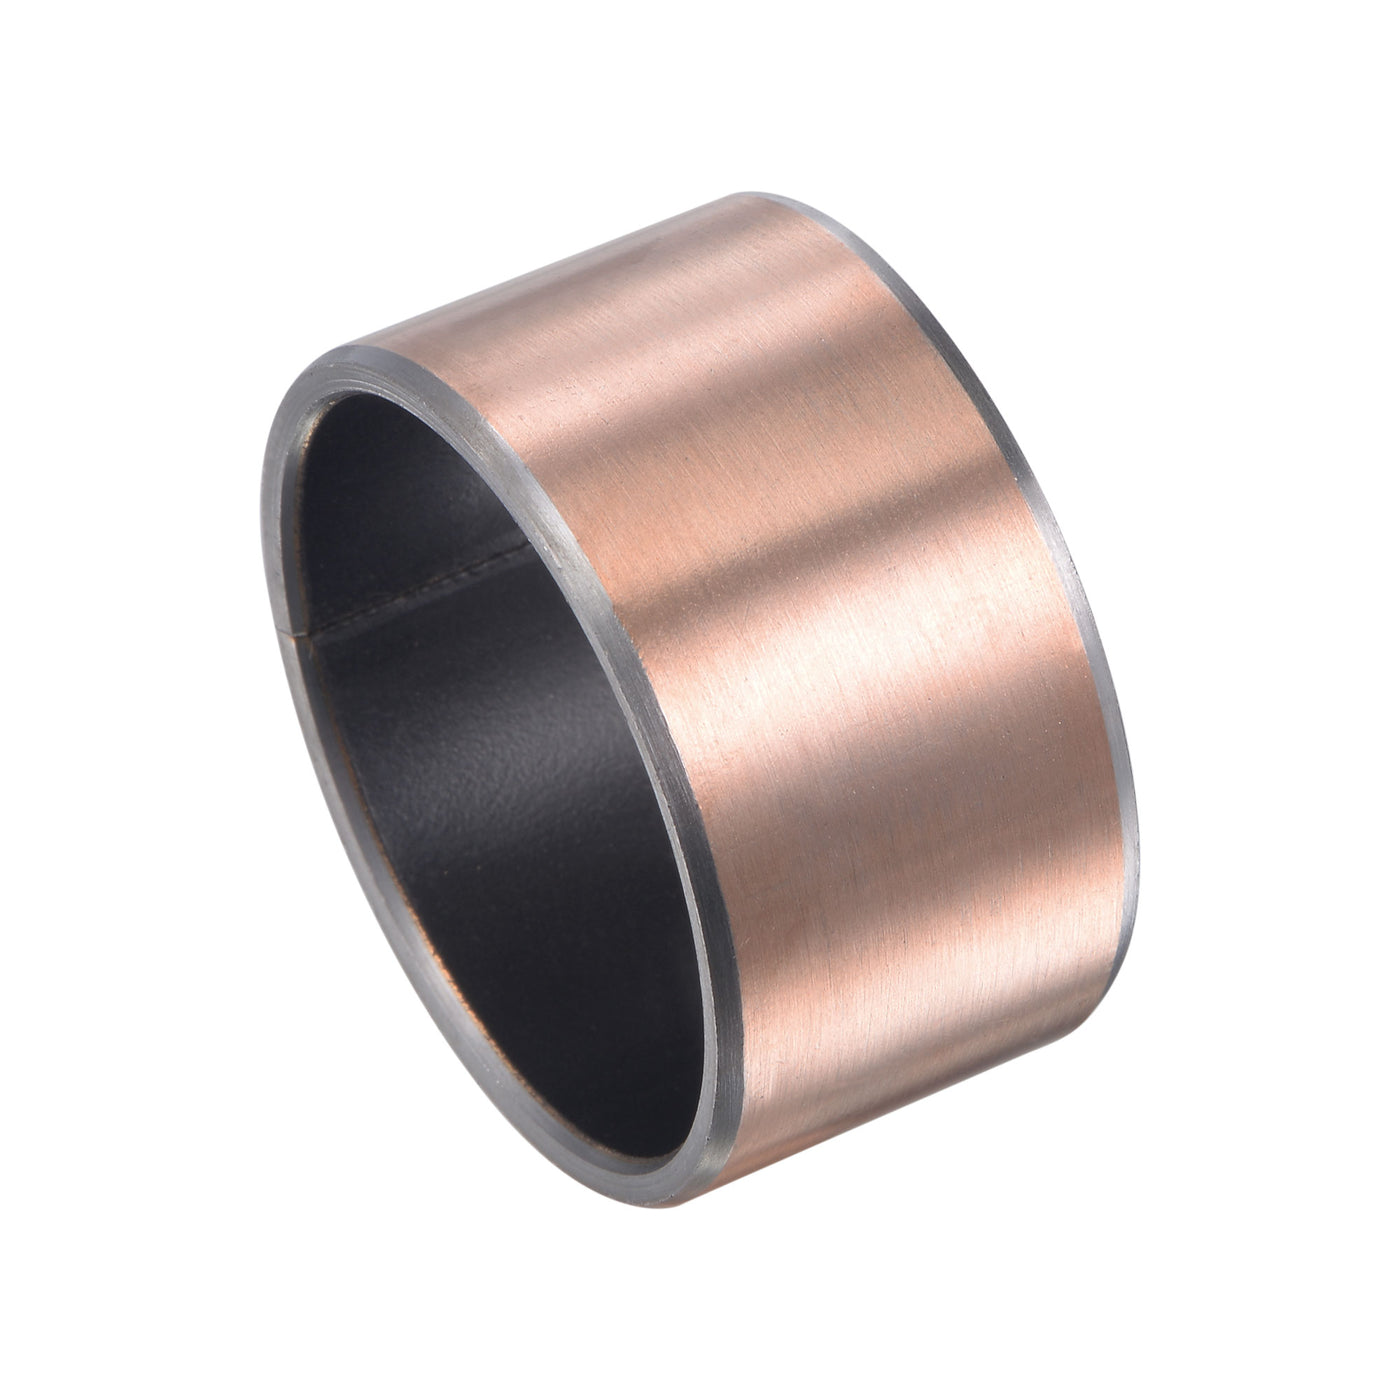 uxcell Uxcell Sleeve (Plain) Bearings Wrapped Oilless Bushings Steel Backing